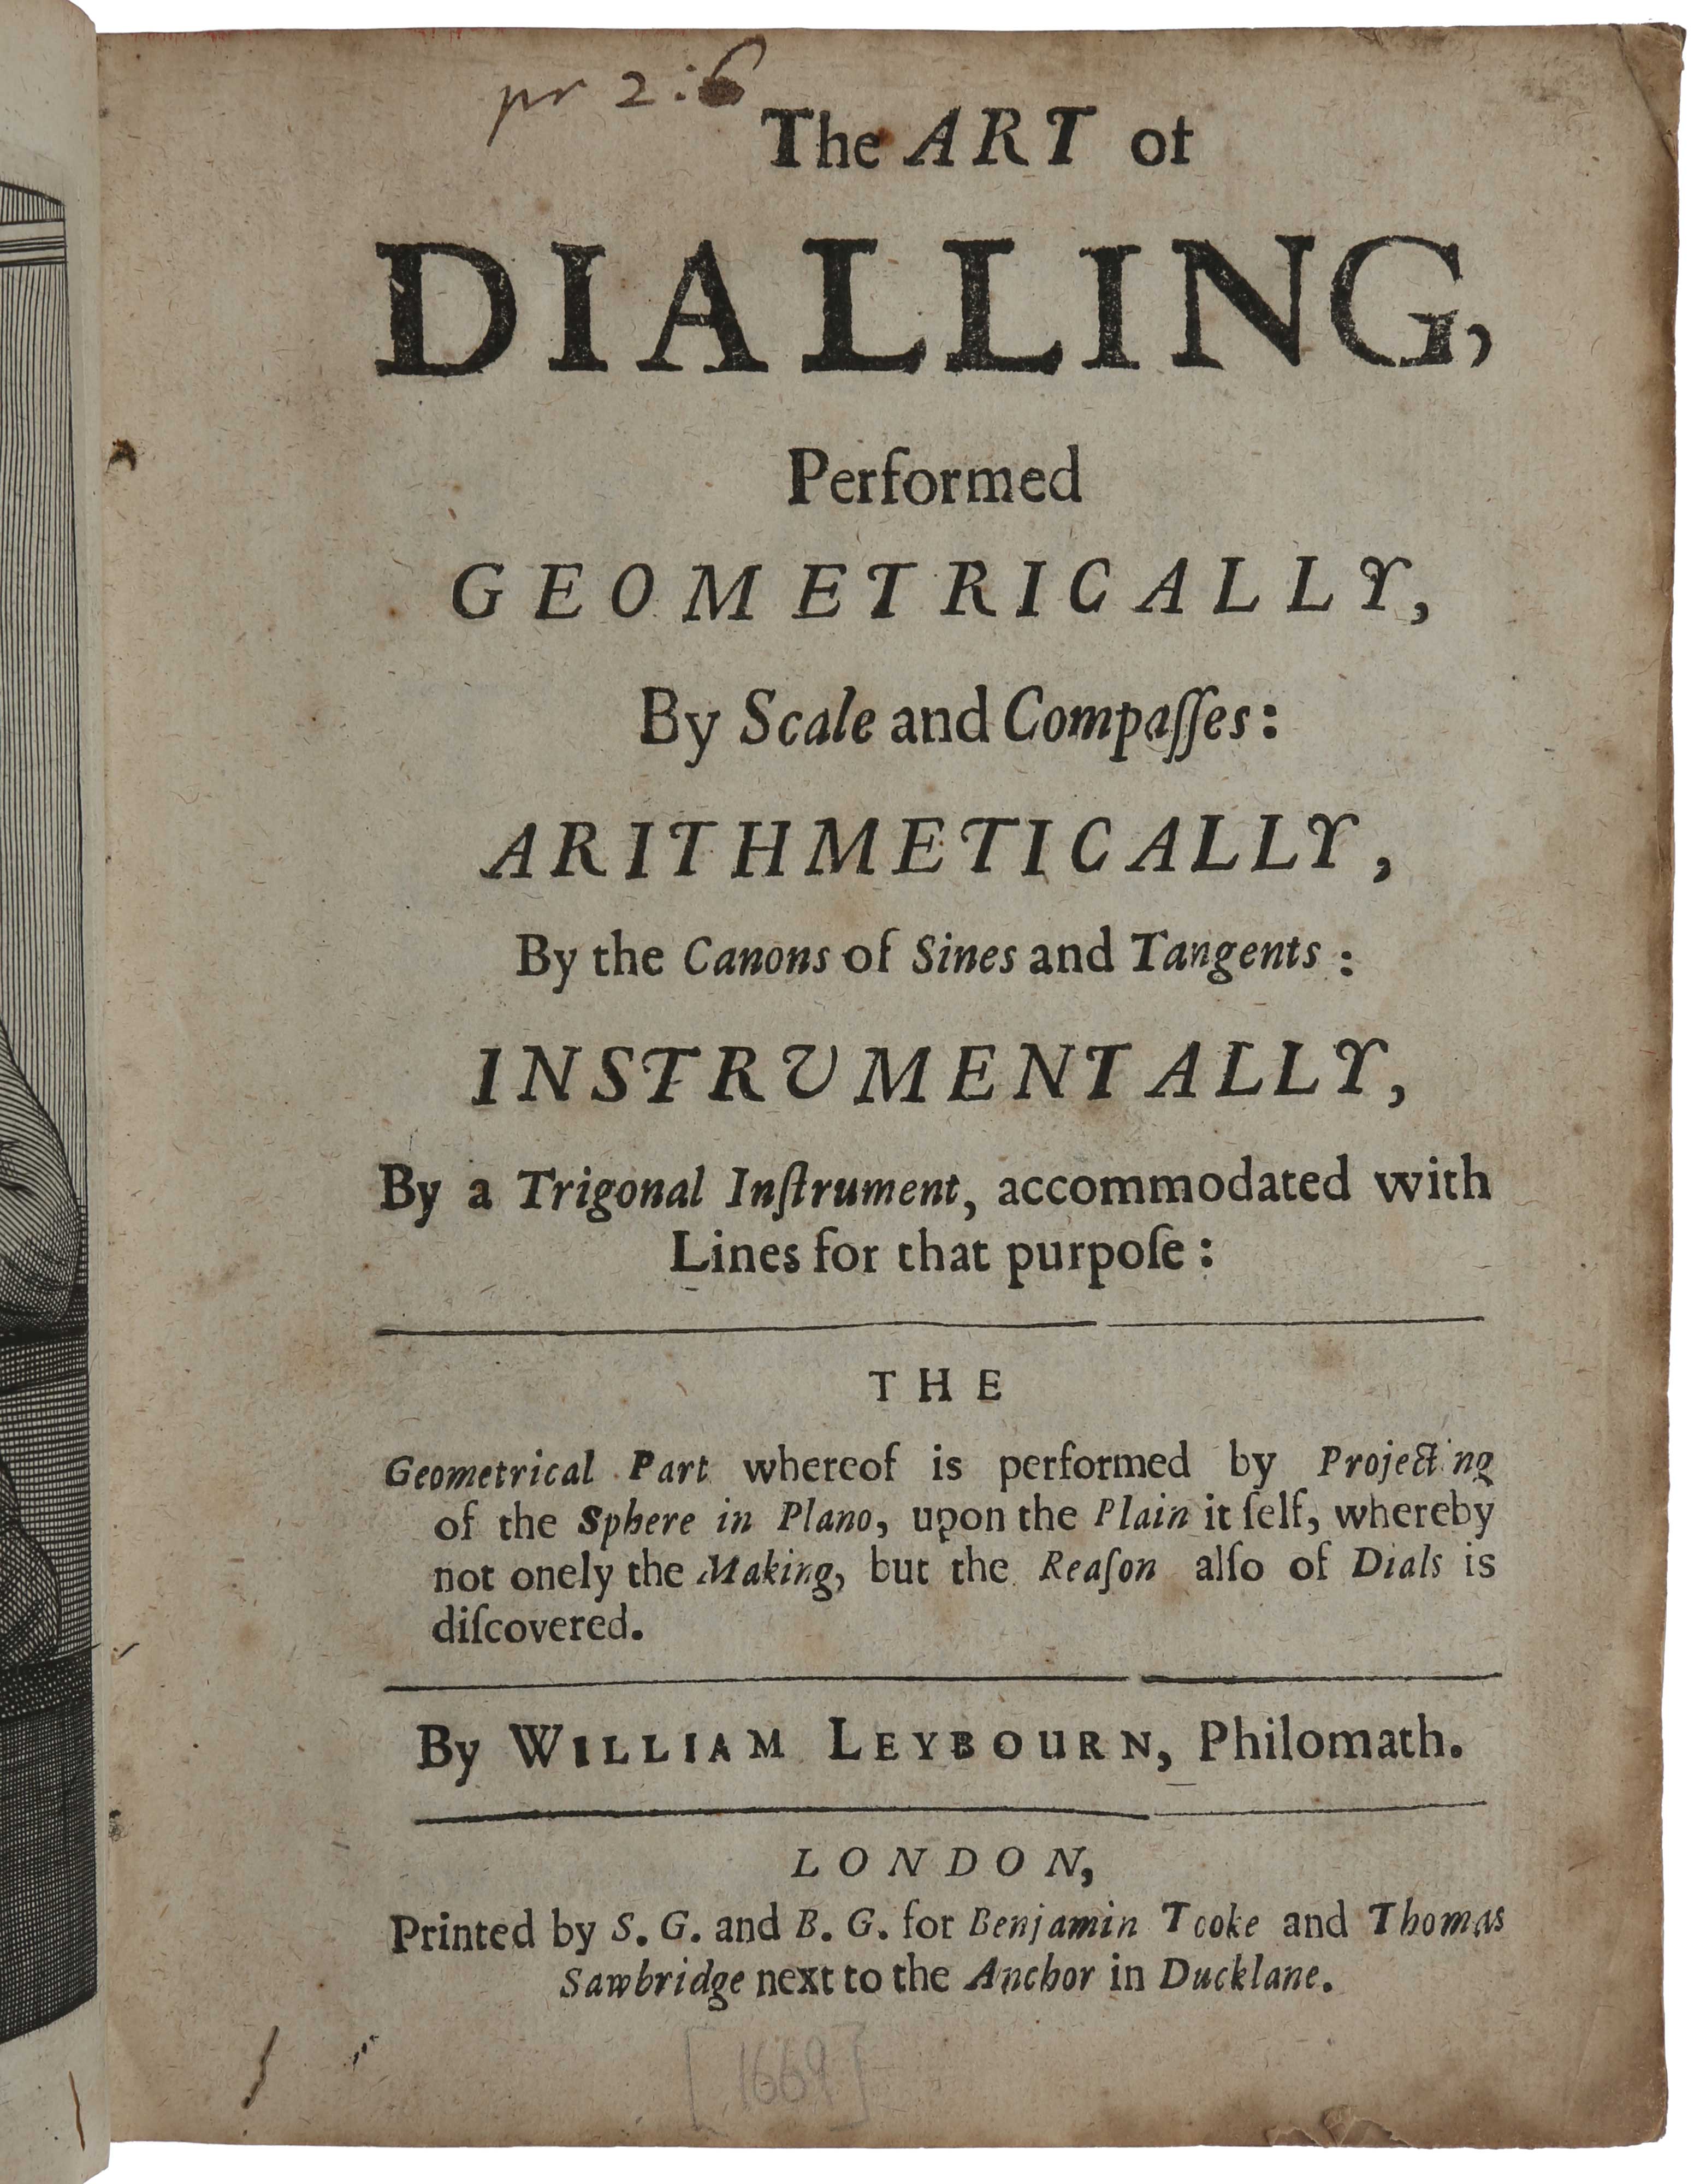 Item #4610 The art of dialling performed geometrically by scale and compasses: arithmetically, by the canons of sines and tangents: instrumentally, by a trigonal instrument, accommodated with lines for that purpose; The geometrical part whereof is performed by projecting of the sphere in plano, upon the plain it self, whereby not only the making, but the reason also of dials is discovered. William LEYBOURN.